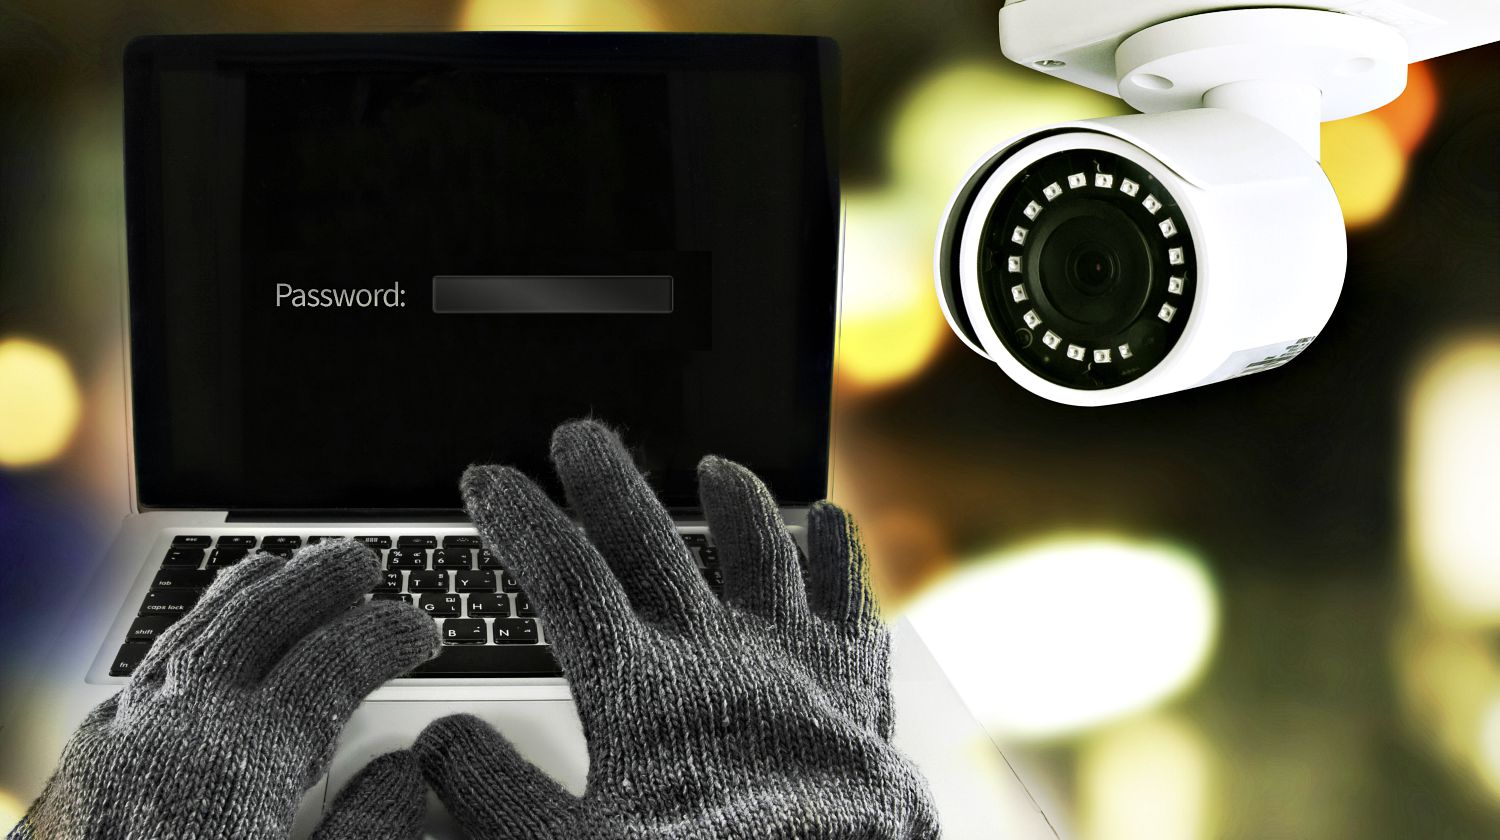 Featured | A hacker in the dark breaks the access to steal information and infect computers | Is Your Home Security System Spying On You?